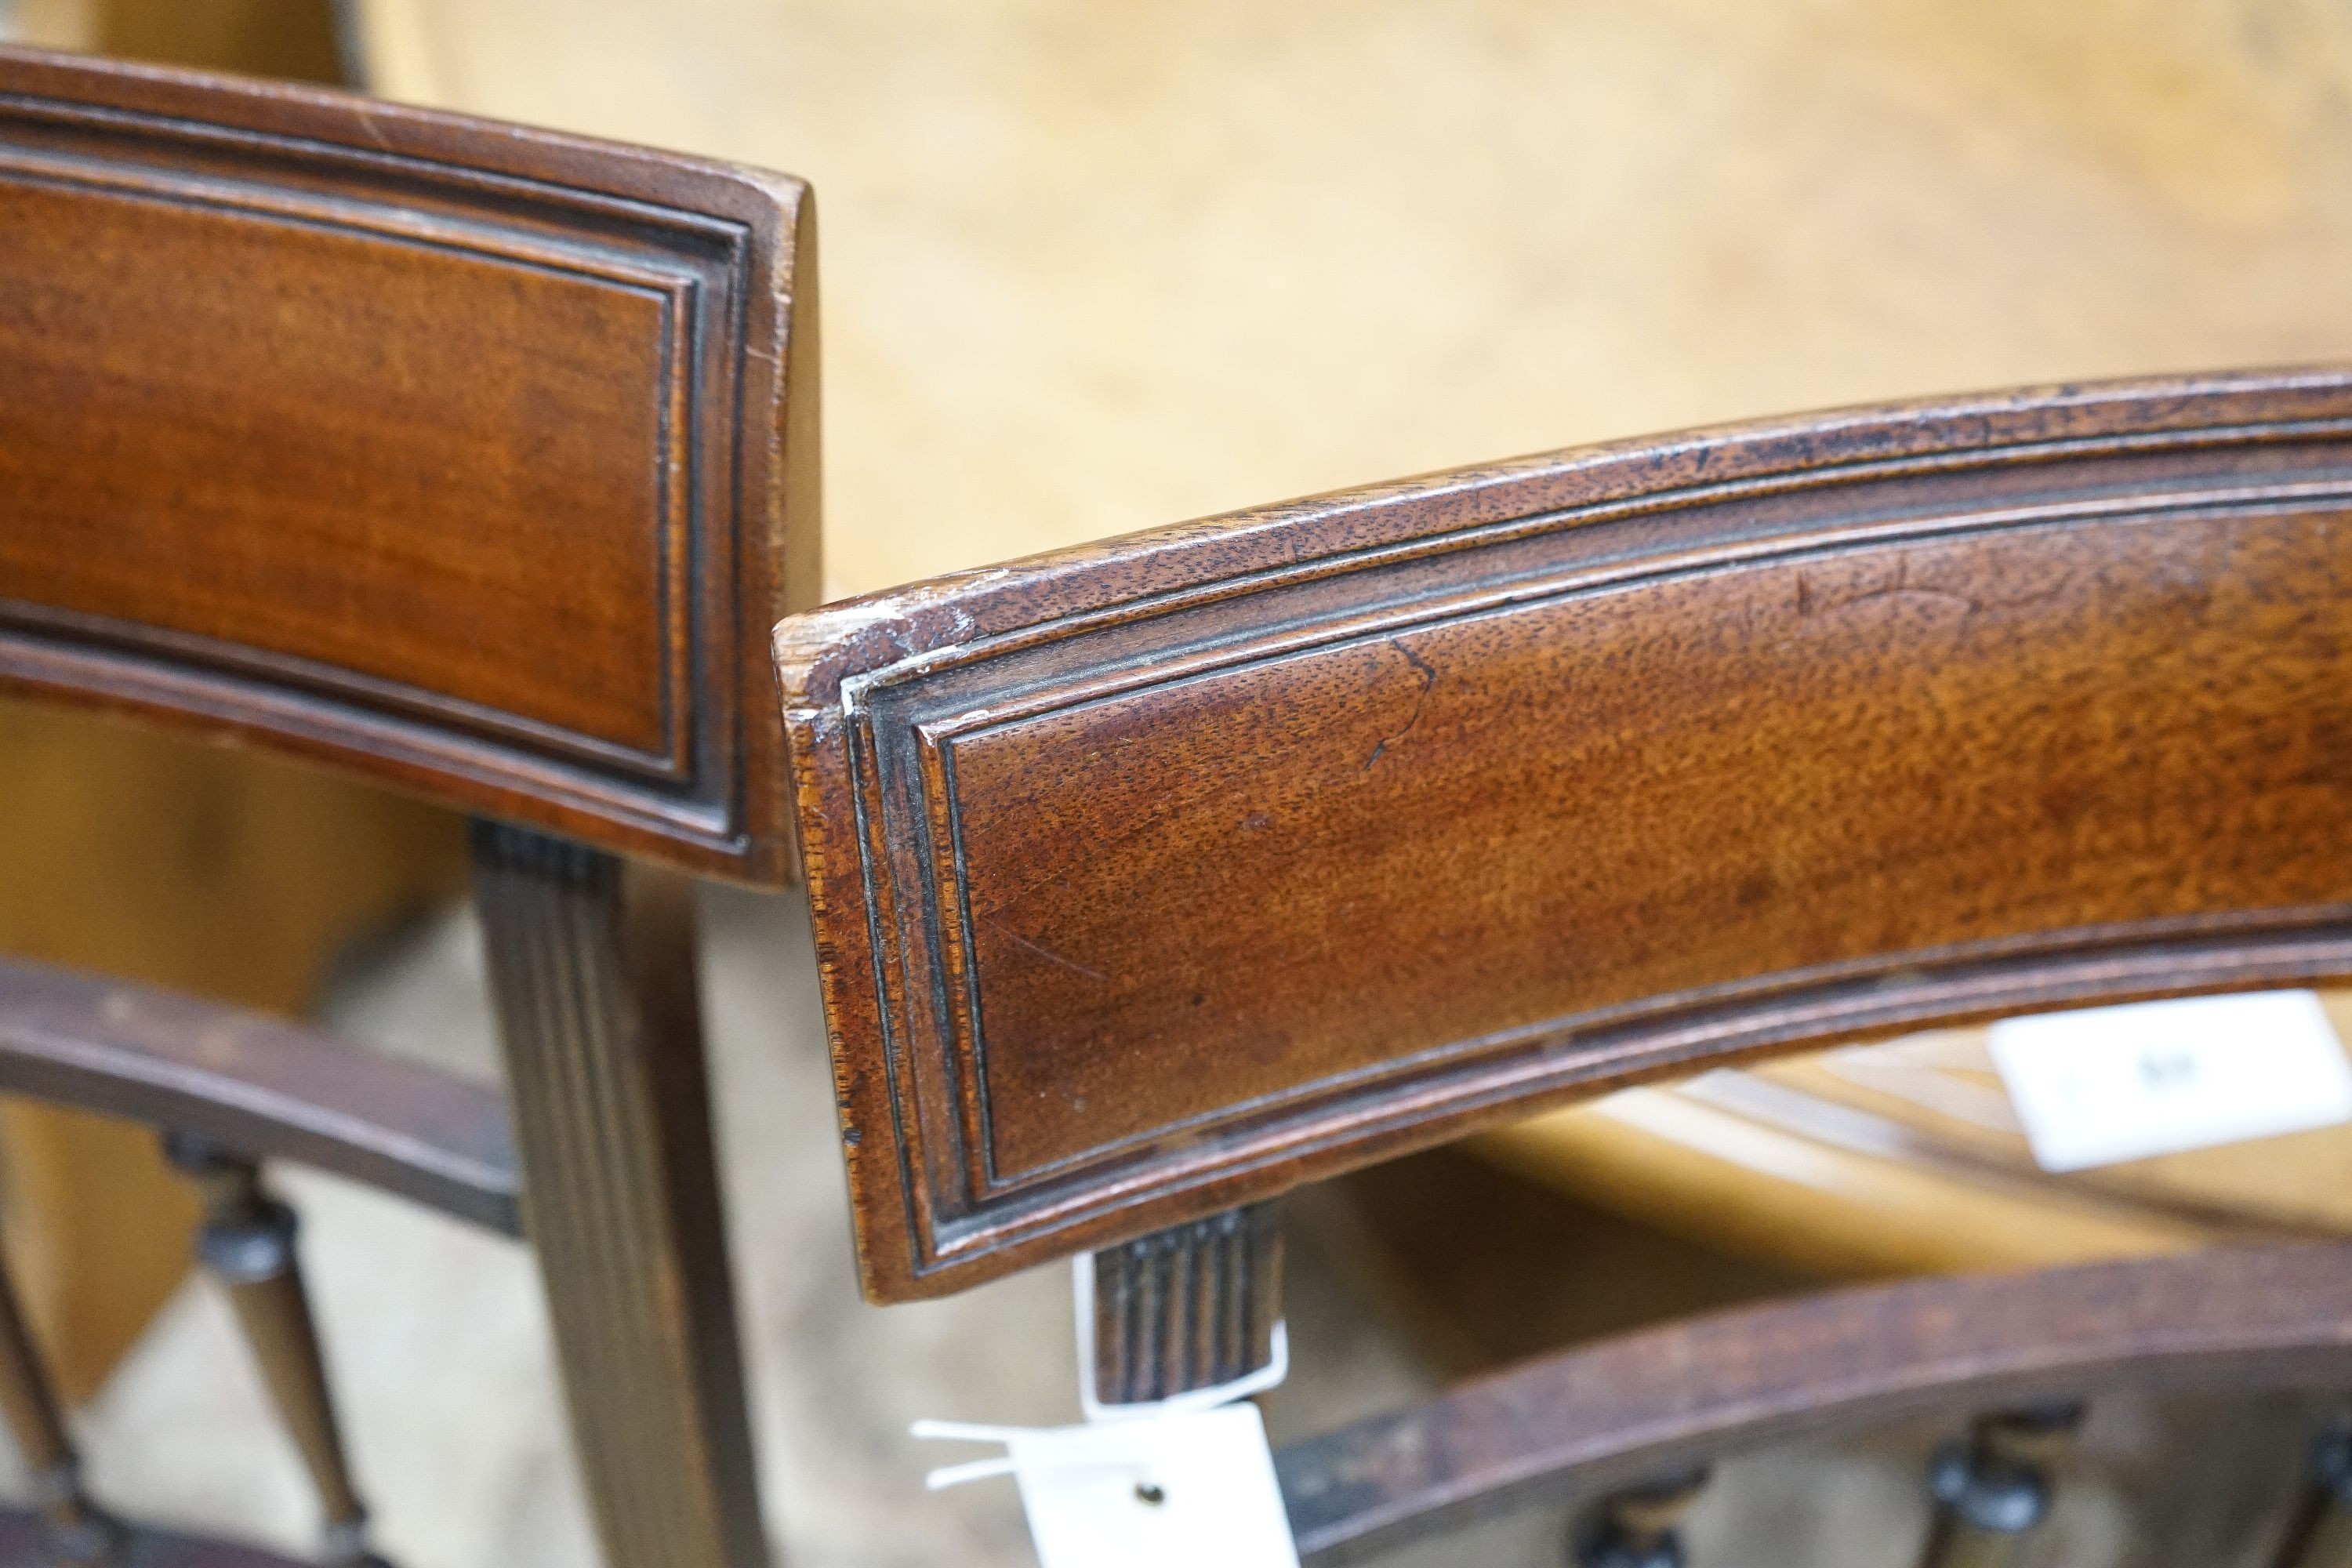 A set of four George IV mahogany dining chairs